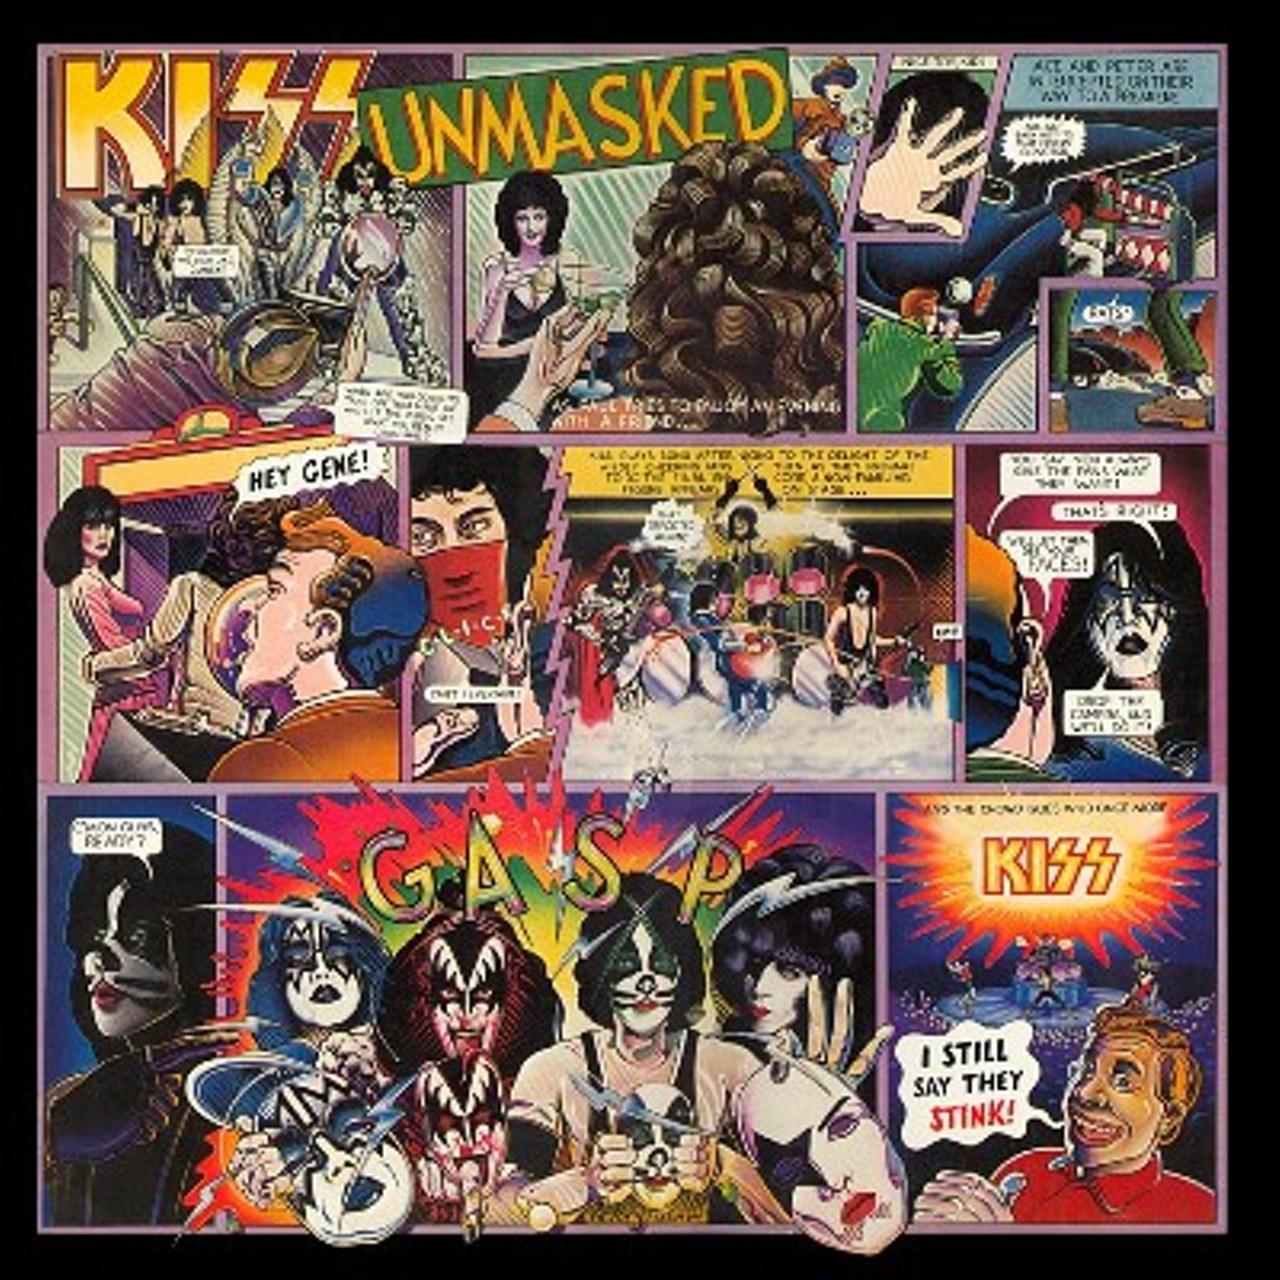 Unmasked is a rather controversial KISS record. It is the last one (before the 1990s reunion) with Peter Criss credited as the drummer. However, he does not actually play on the album. Unmasked is super poppy and turned off a lot of KISS fans that were already struggling with the disco-infected Dynasty. If you can get over how poppy Unmasked is, it’s not a bad record; it is just not a rock album. It has a number of redeemable moments. For instance, Ace’s “Talk To Me” and the Runaways-flavored “Is That You” are infectious, as is Simmons’ “She’s So European.” Avoid “Shandi” and “Naked City.” Overall, if you tread carefully, you just might enjoy it.